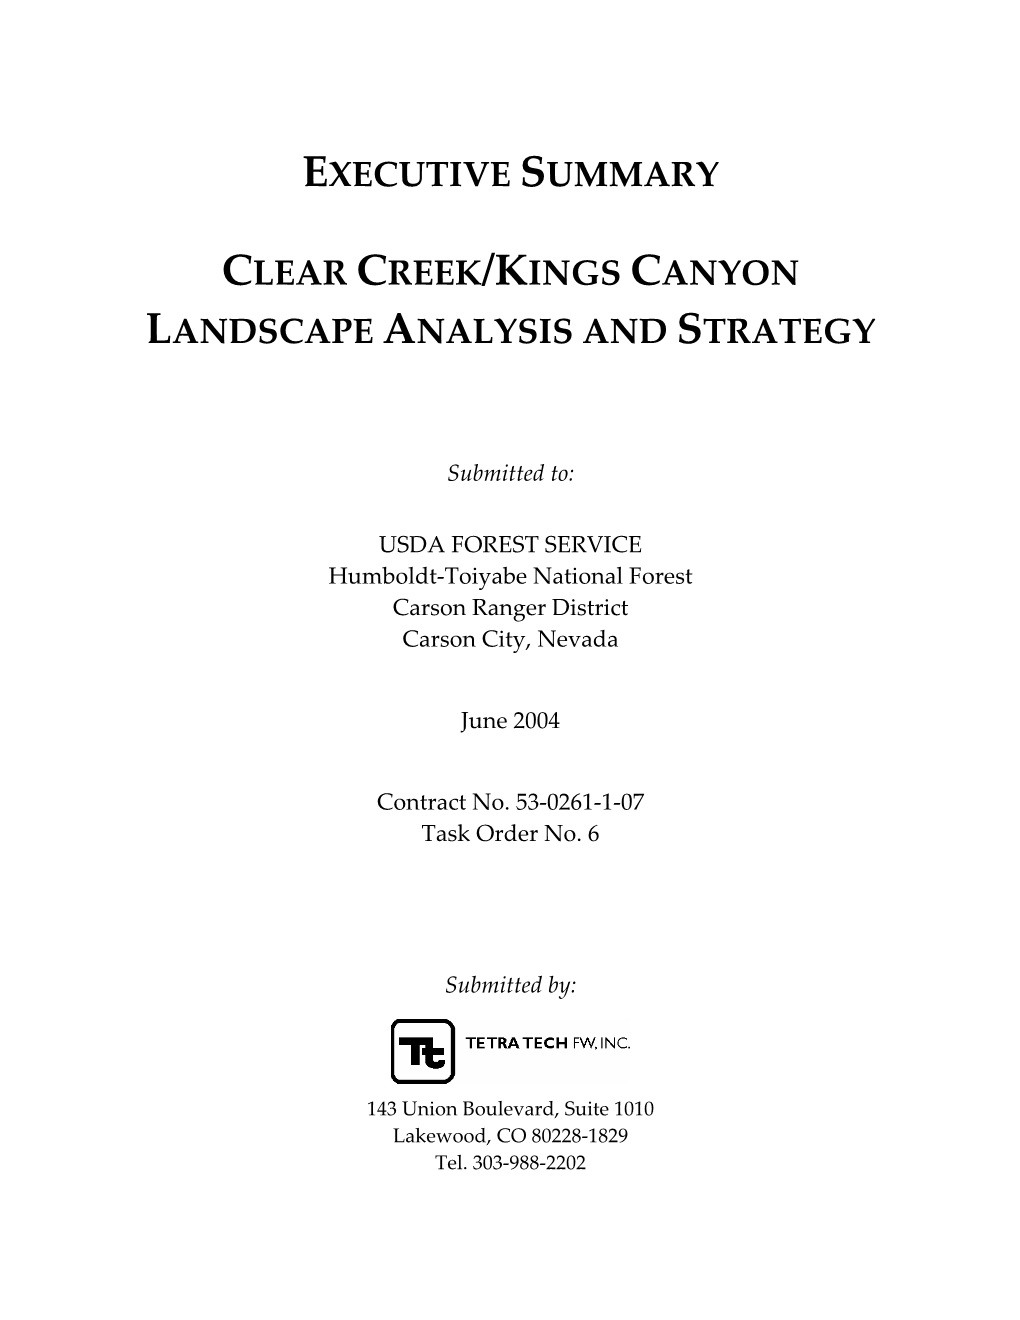 Executive Summary Clear Creek/Kings Canyon Landscape Analysis and Strategy